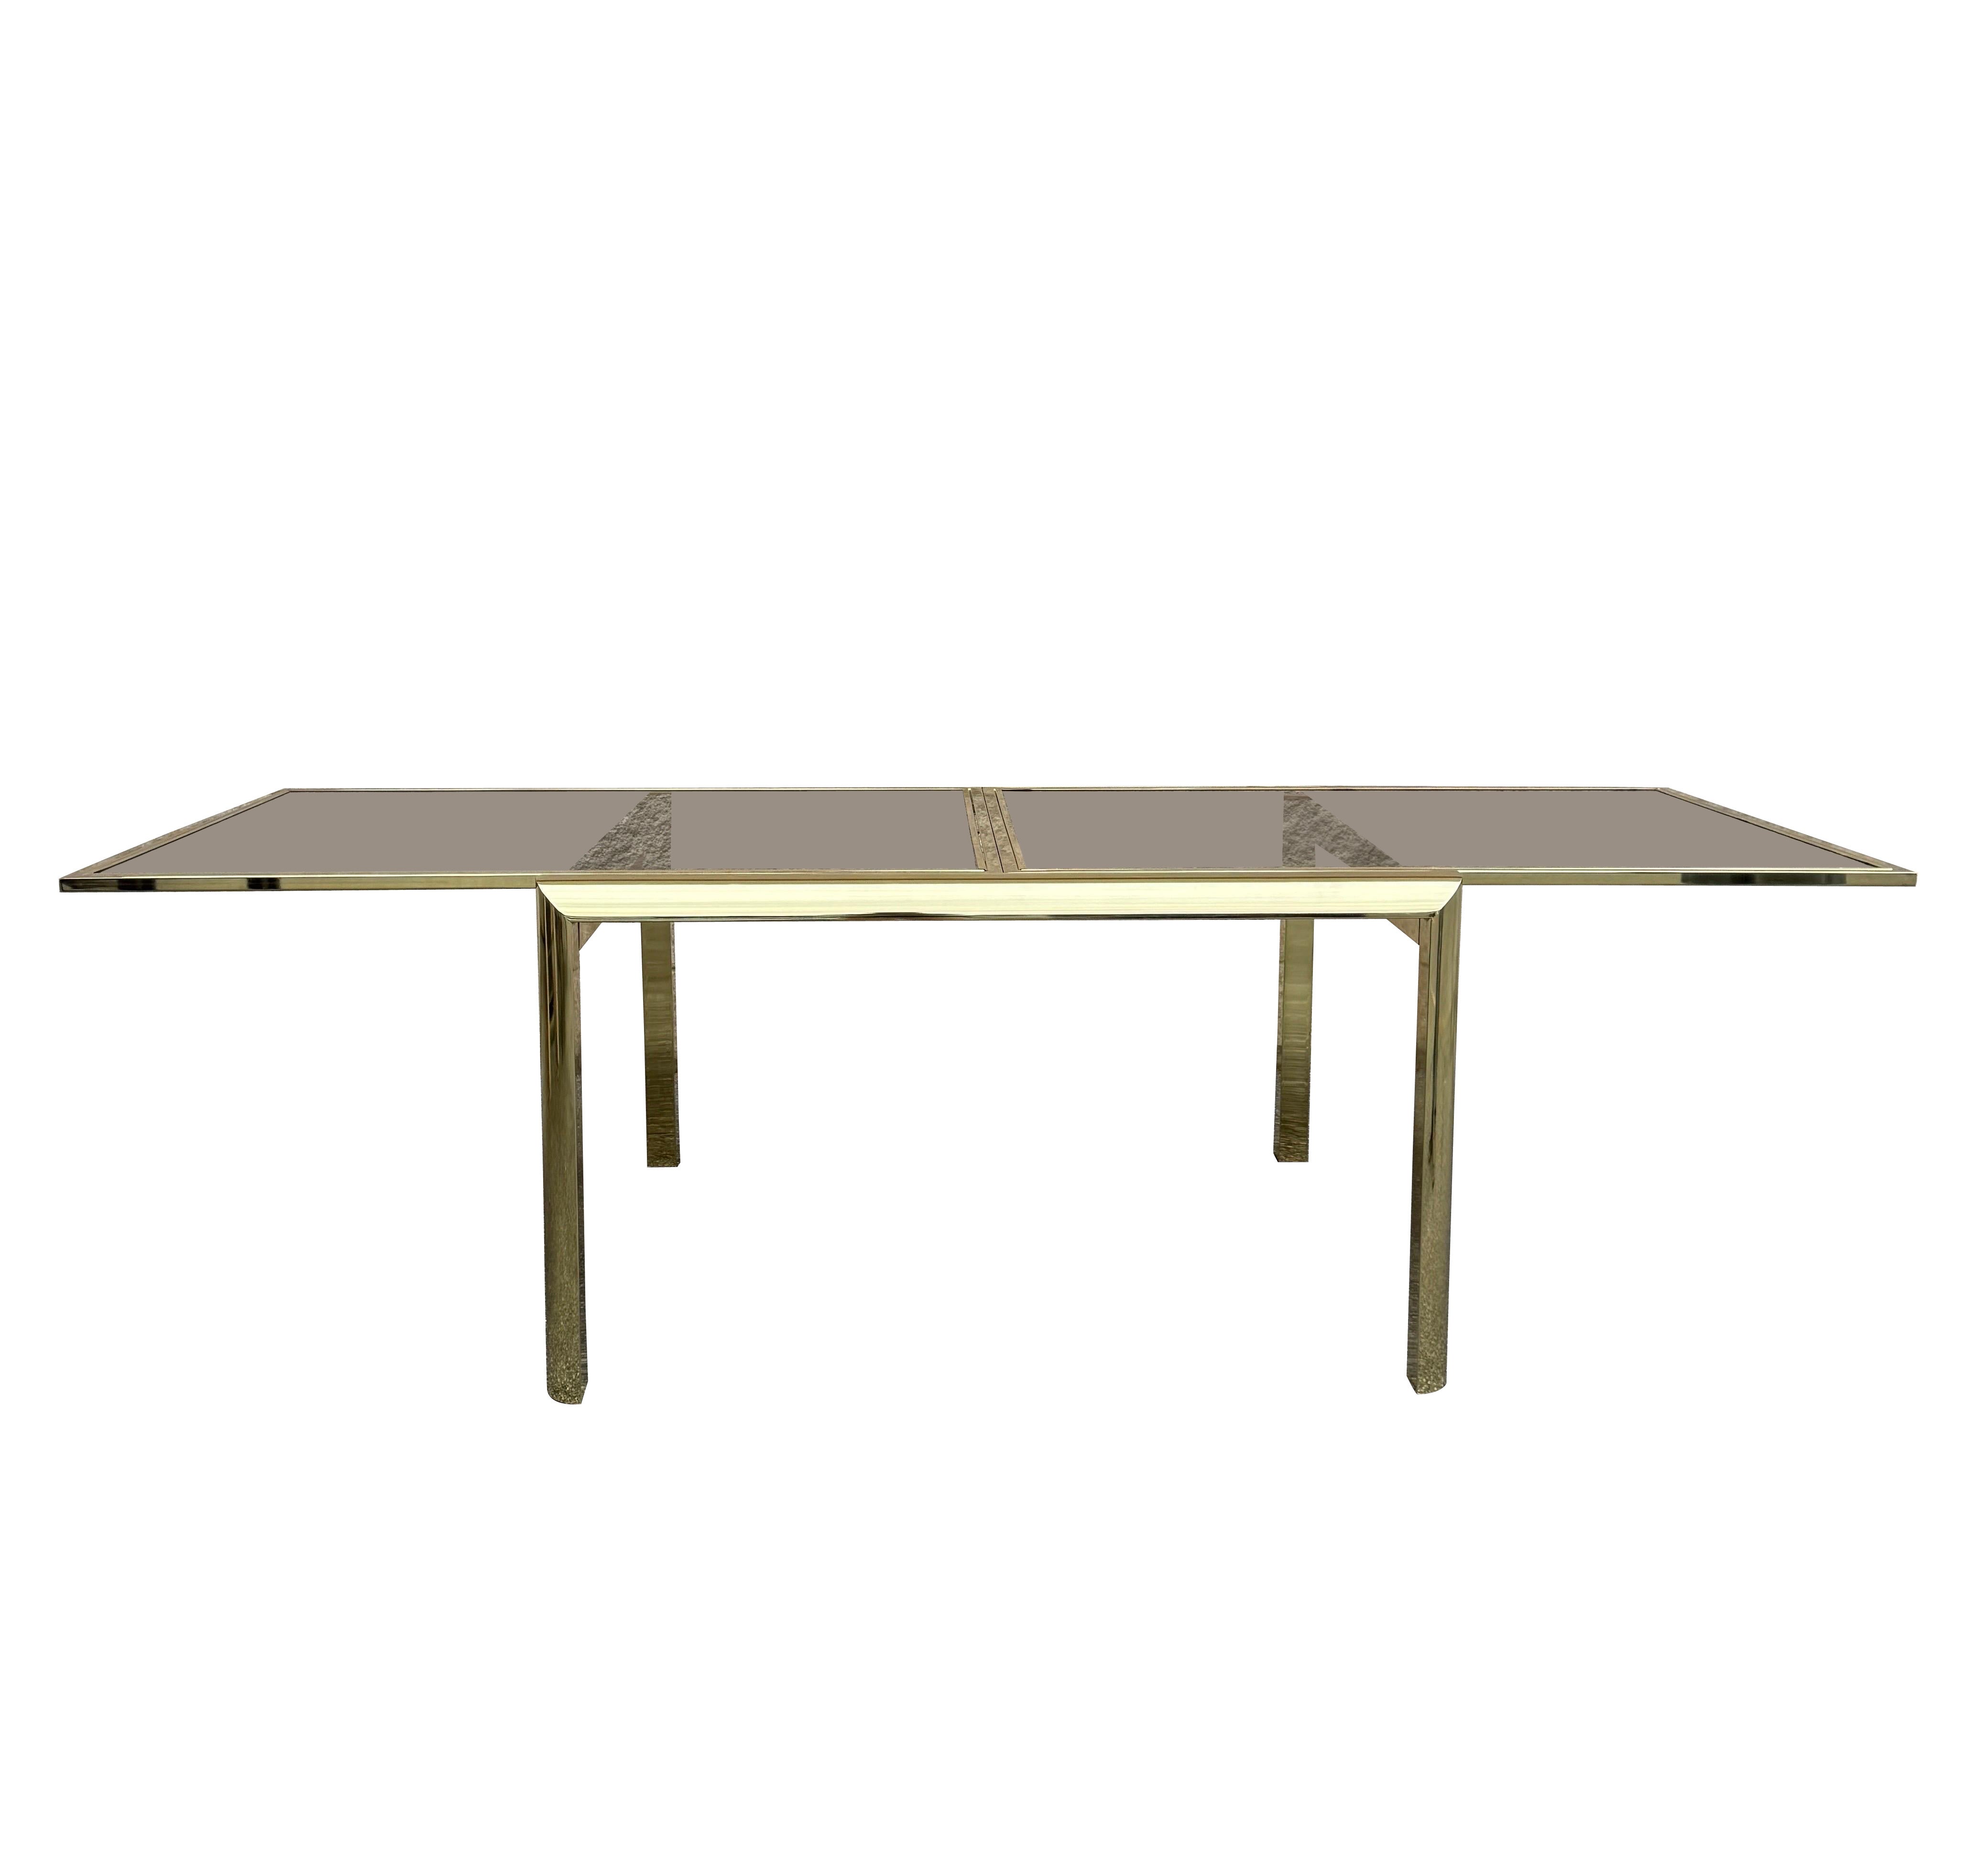 Vintage DIA Hollywood Regency Style Brass and Glass Top Extendable Dining Table